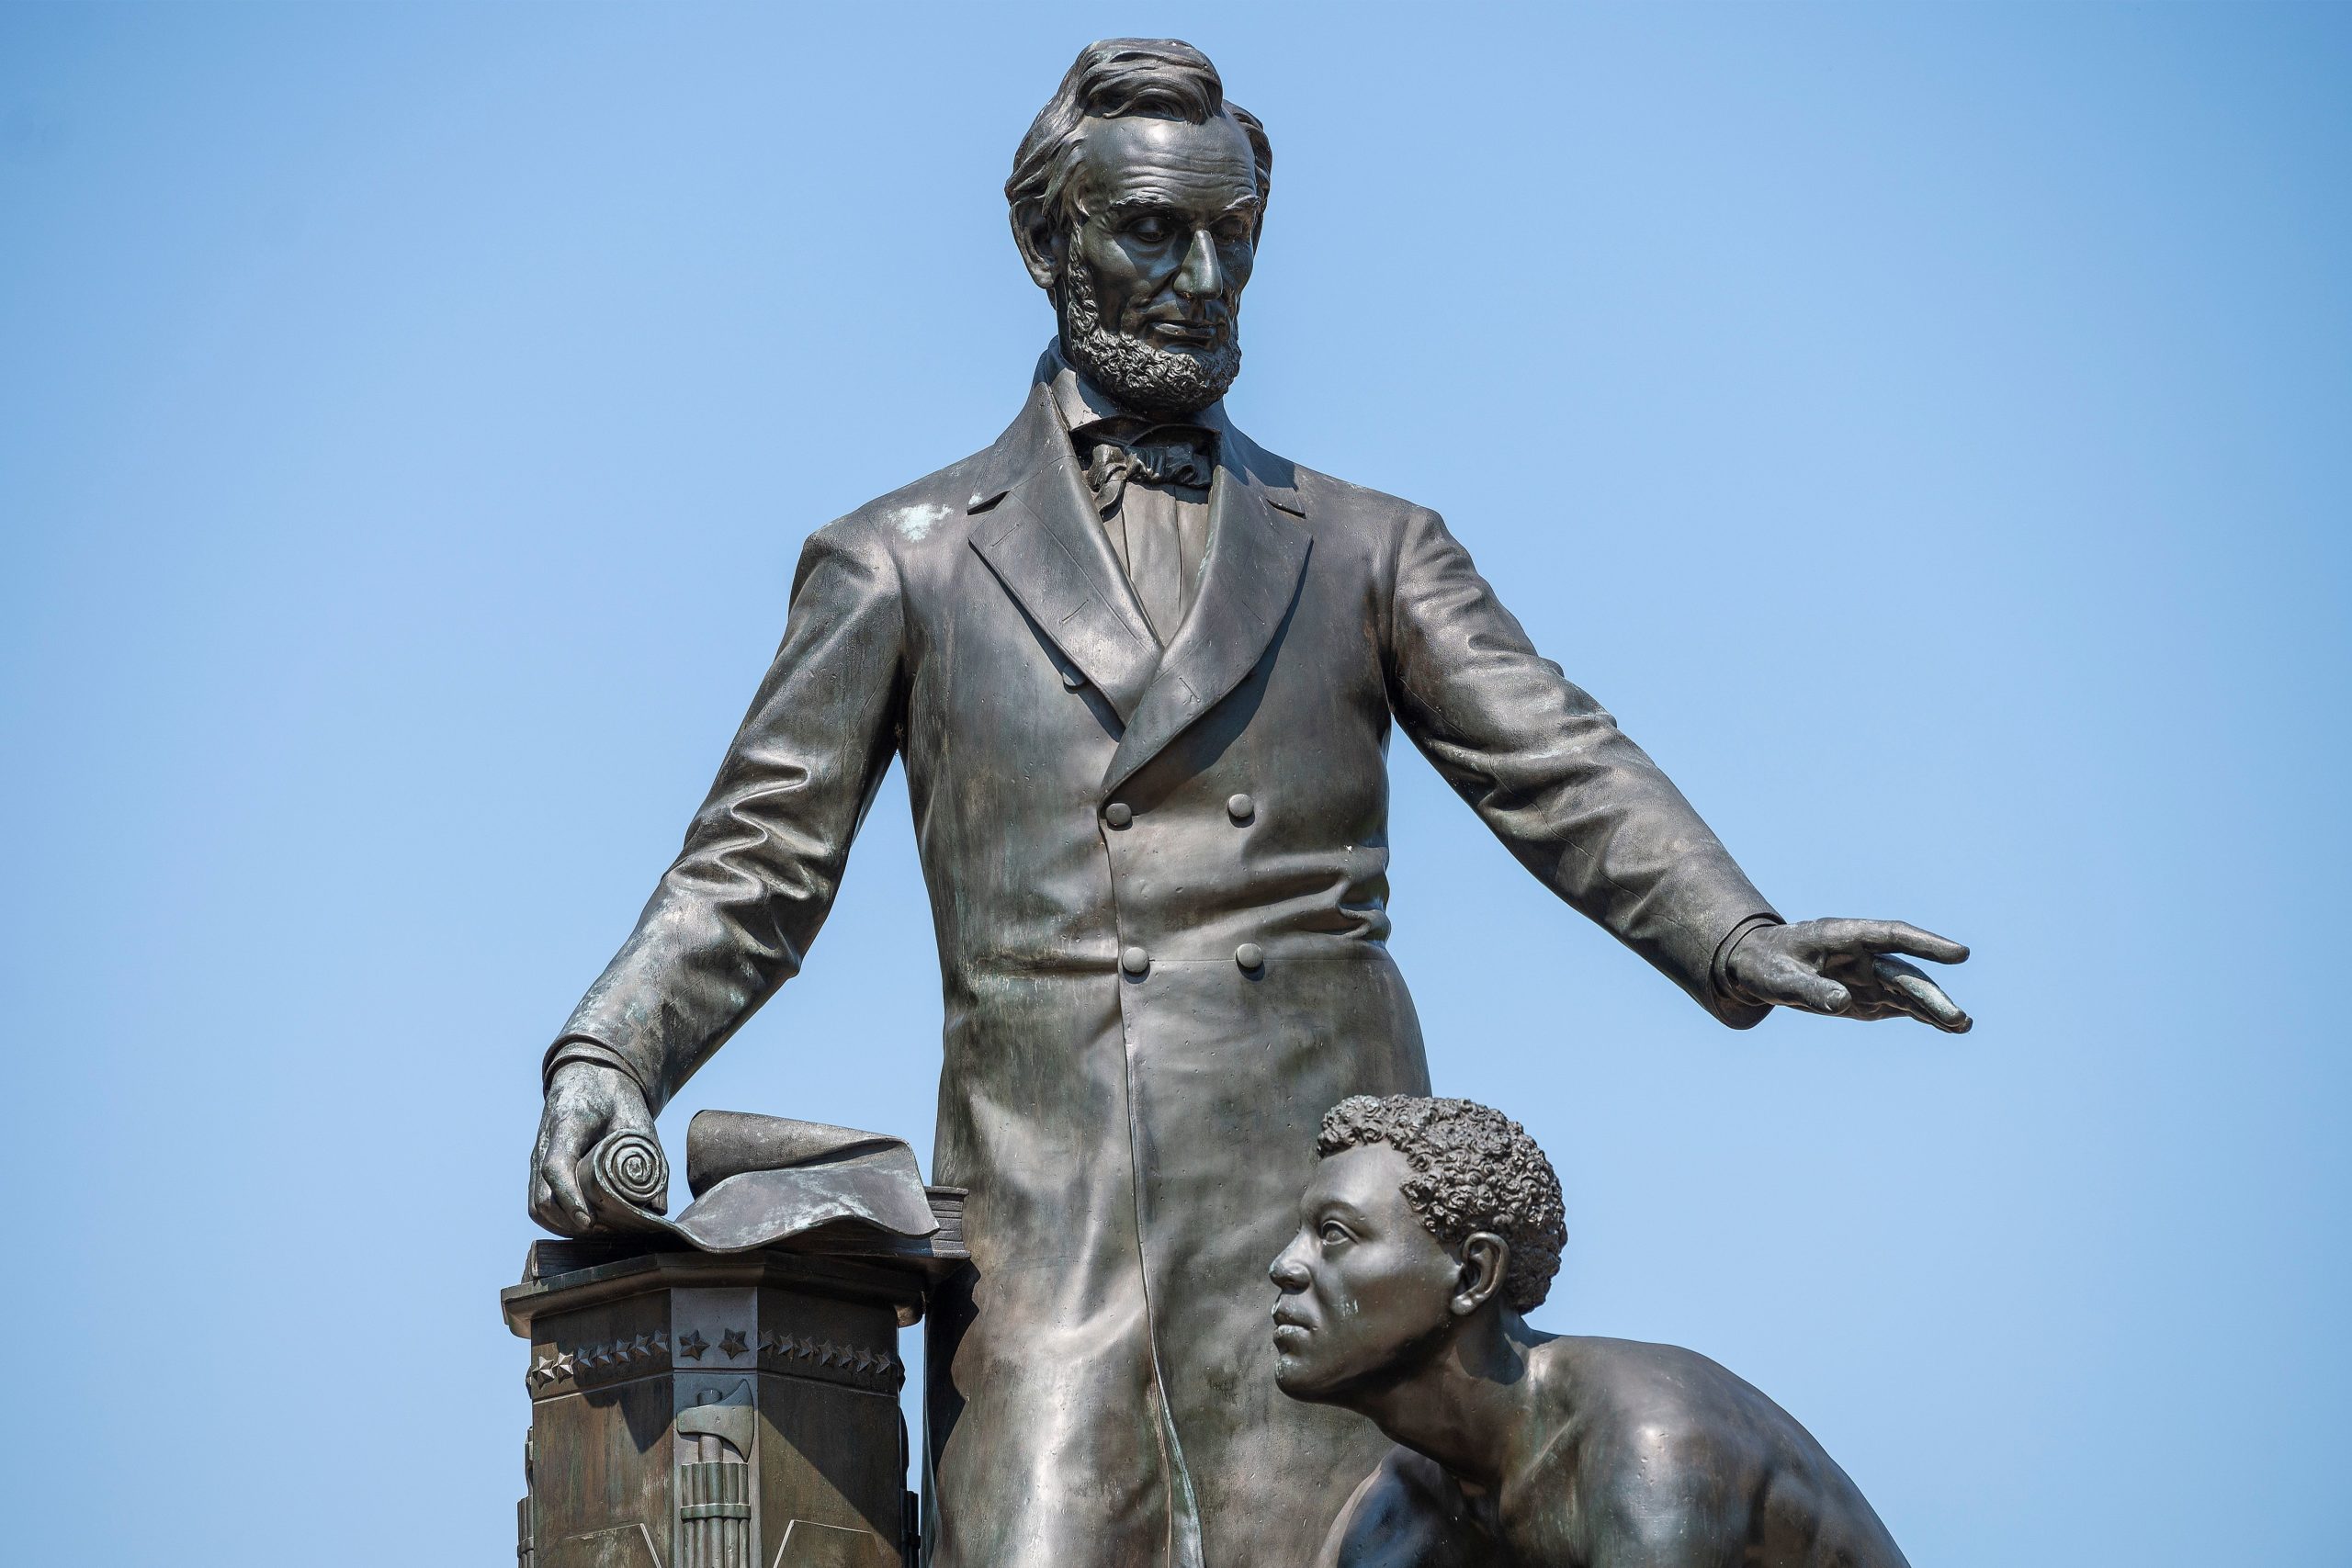 The Lincoln Park 'Emancipation' statue, a statue that is among monuments drawing scrutiny that depicts former US President Abraham Lincoln standing over a kneeling freed Africans American man, is seen in Washington, DC, on June 22, 2020. (Photo by JIM WATSON / AFP) (Photo by JIM WATSON/AFP via Getty Images)